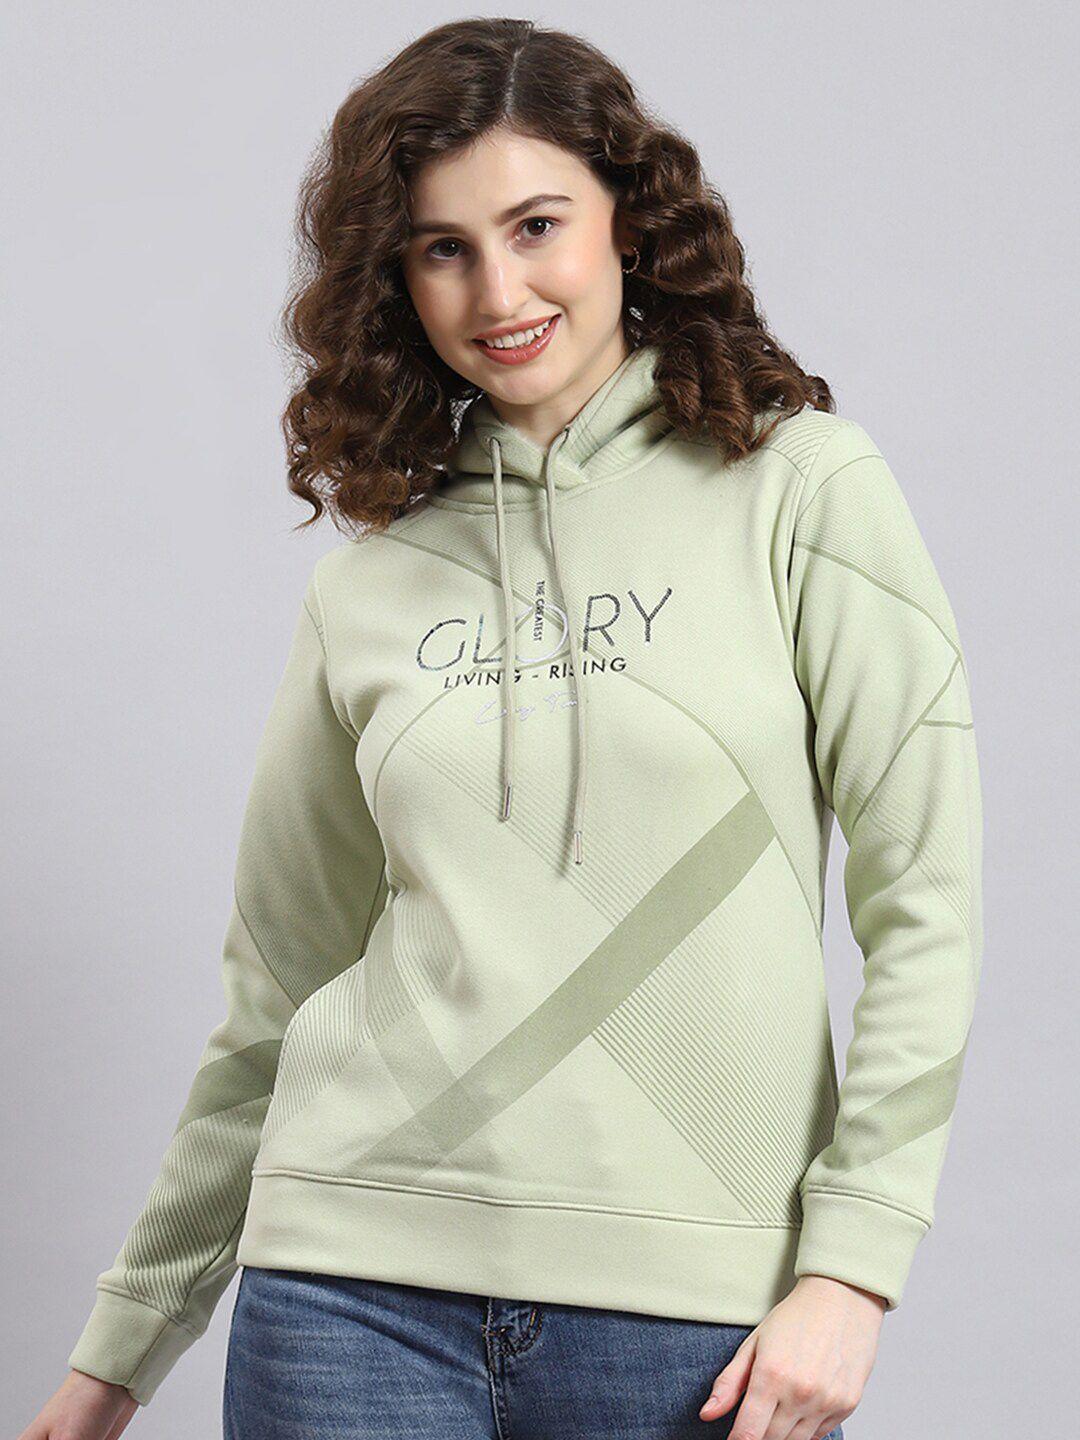 monte carlo typography embroidered hooded pullover sweatshirt